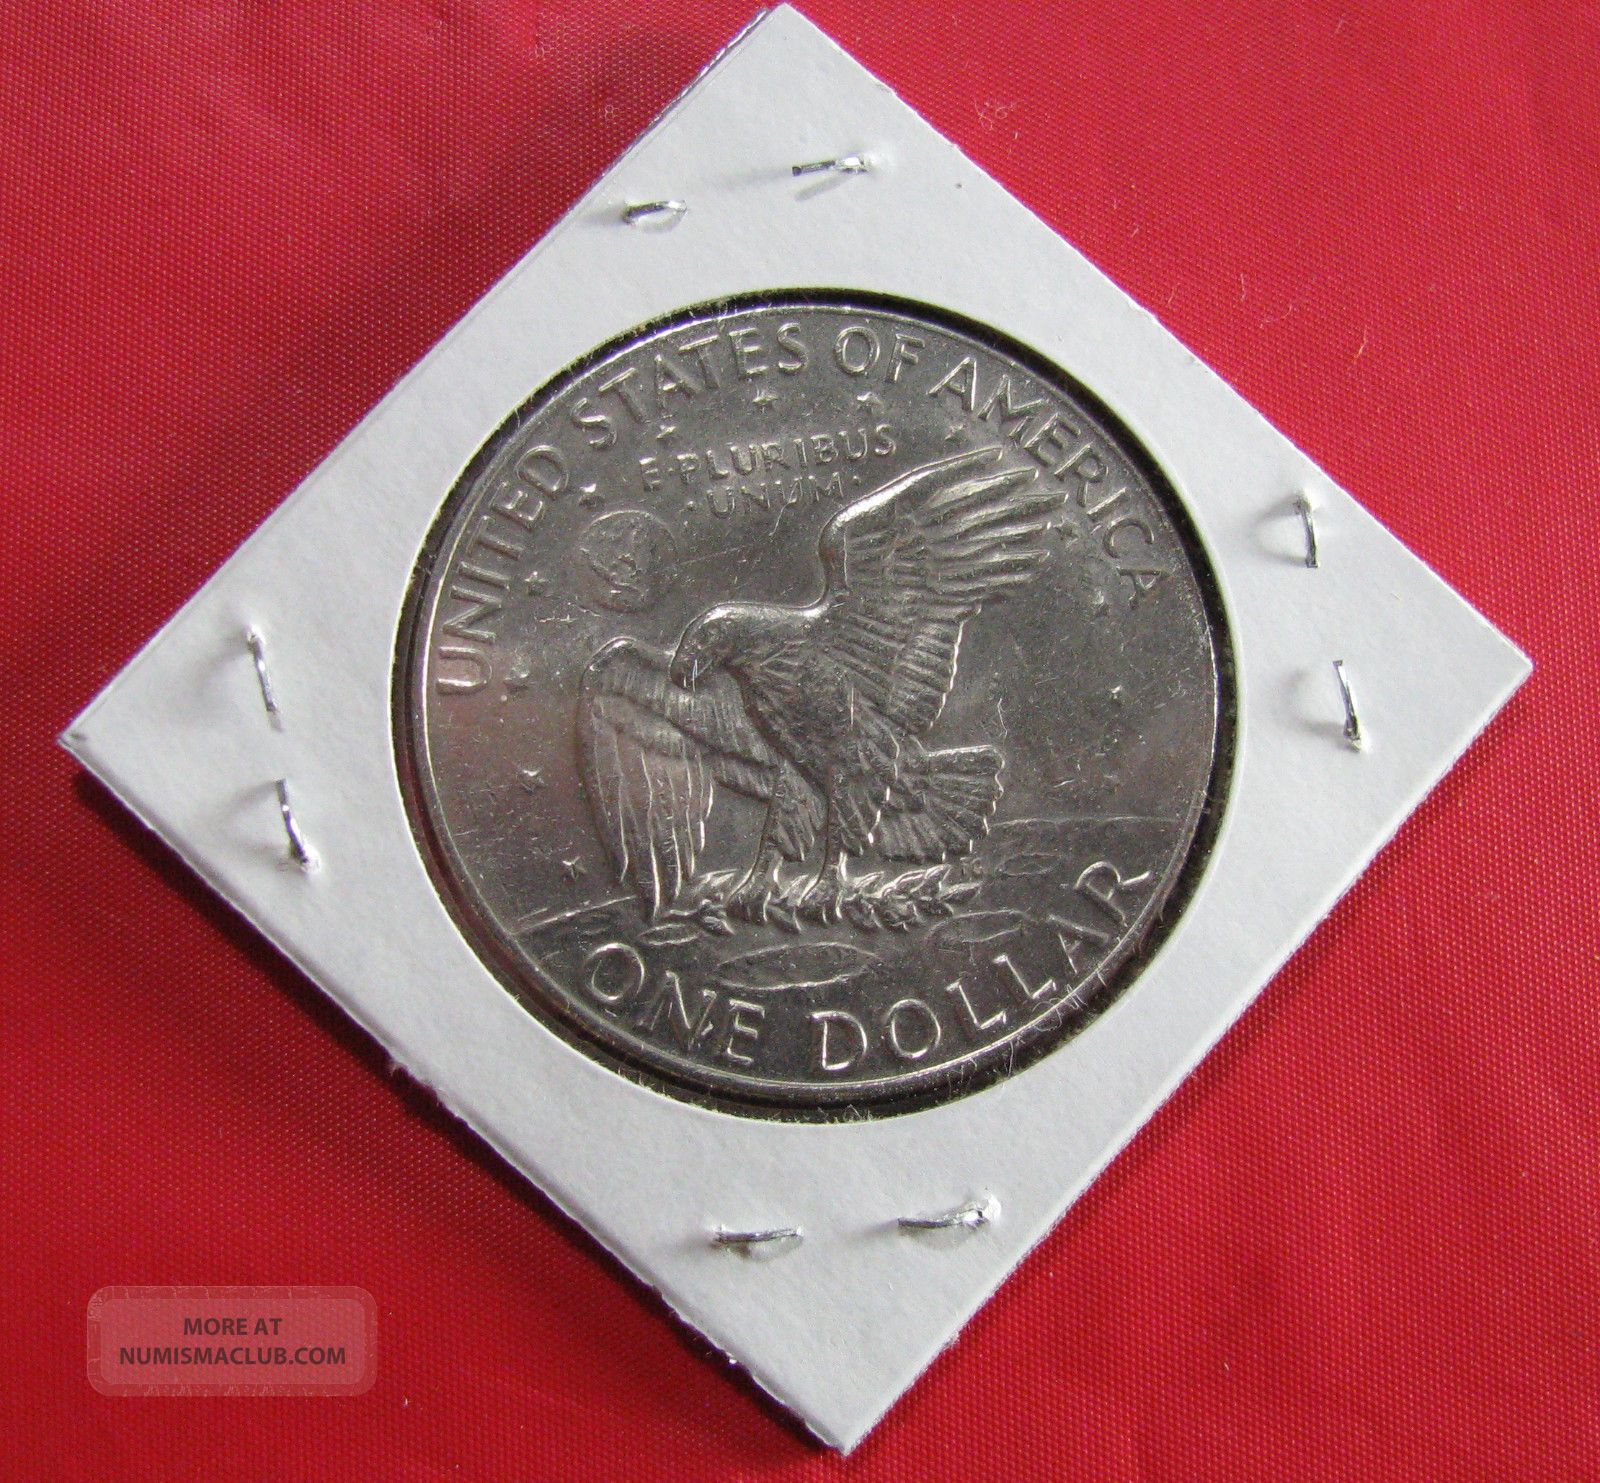 2022 silver dollars for sale